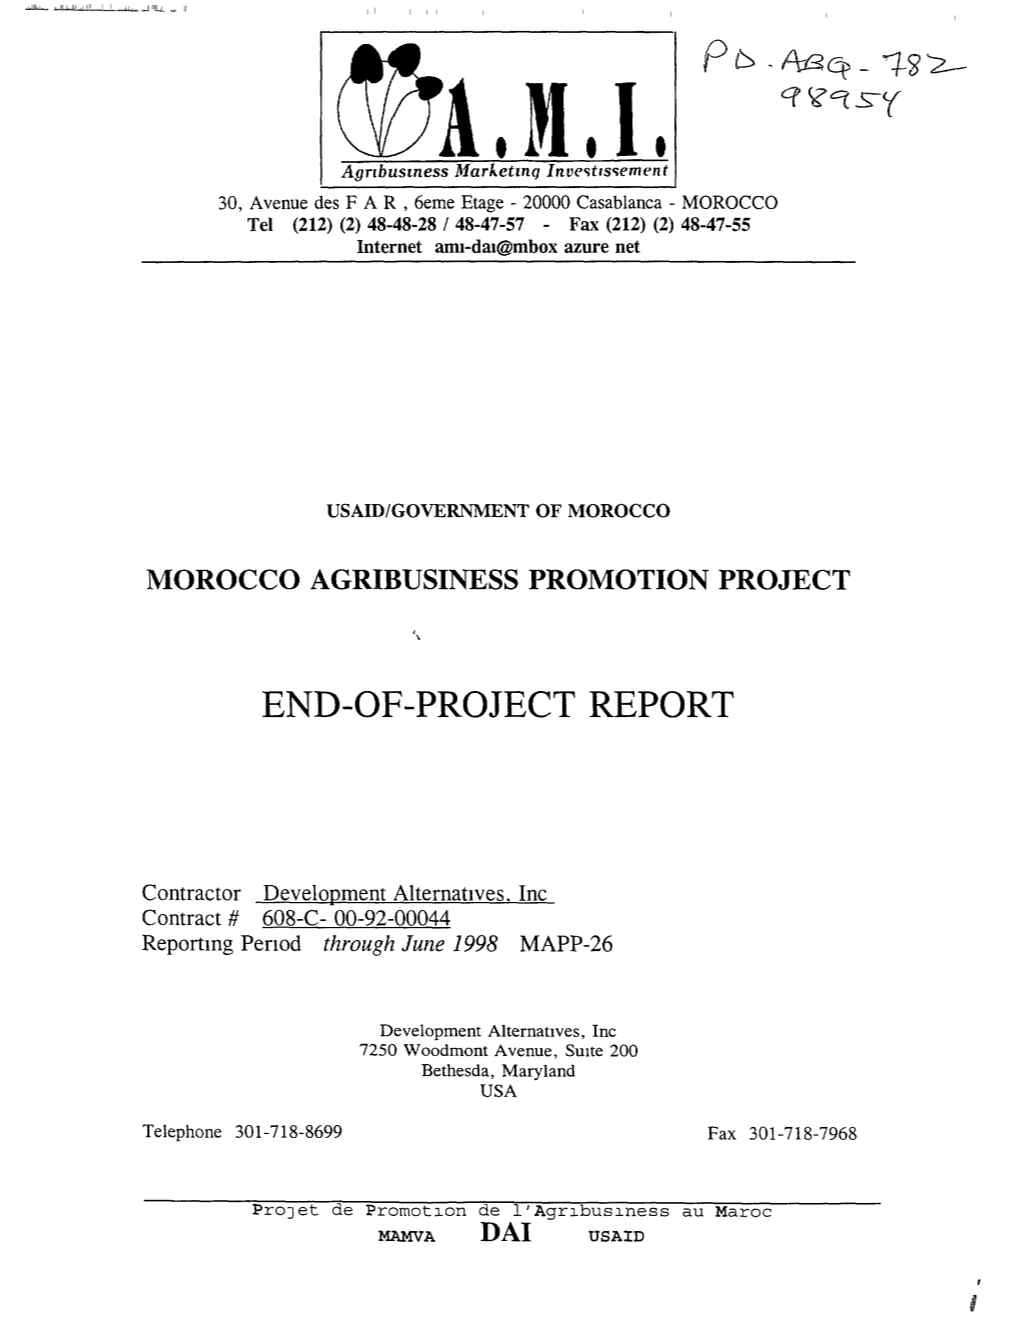 End-Of-Project Report